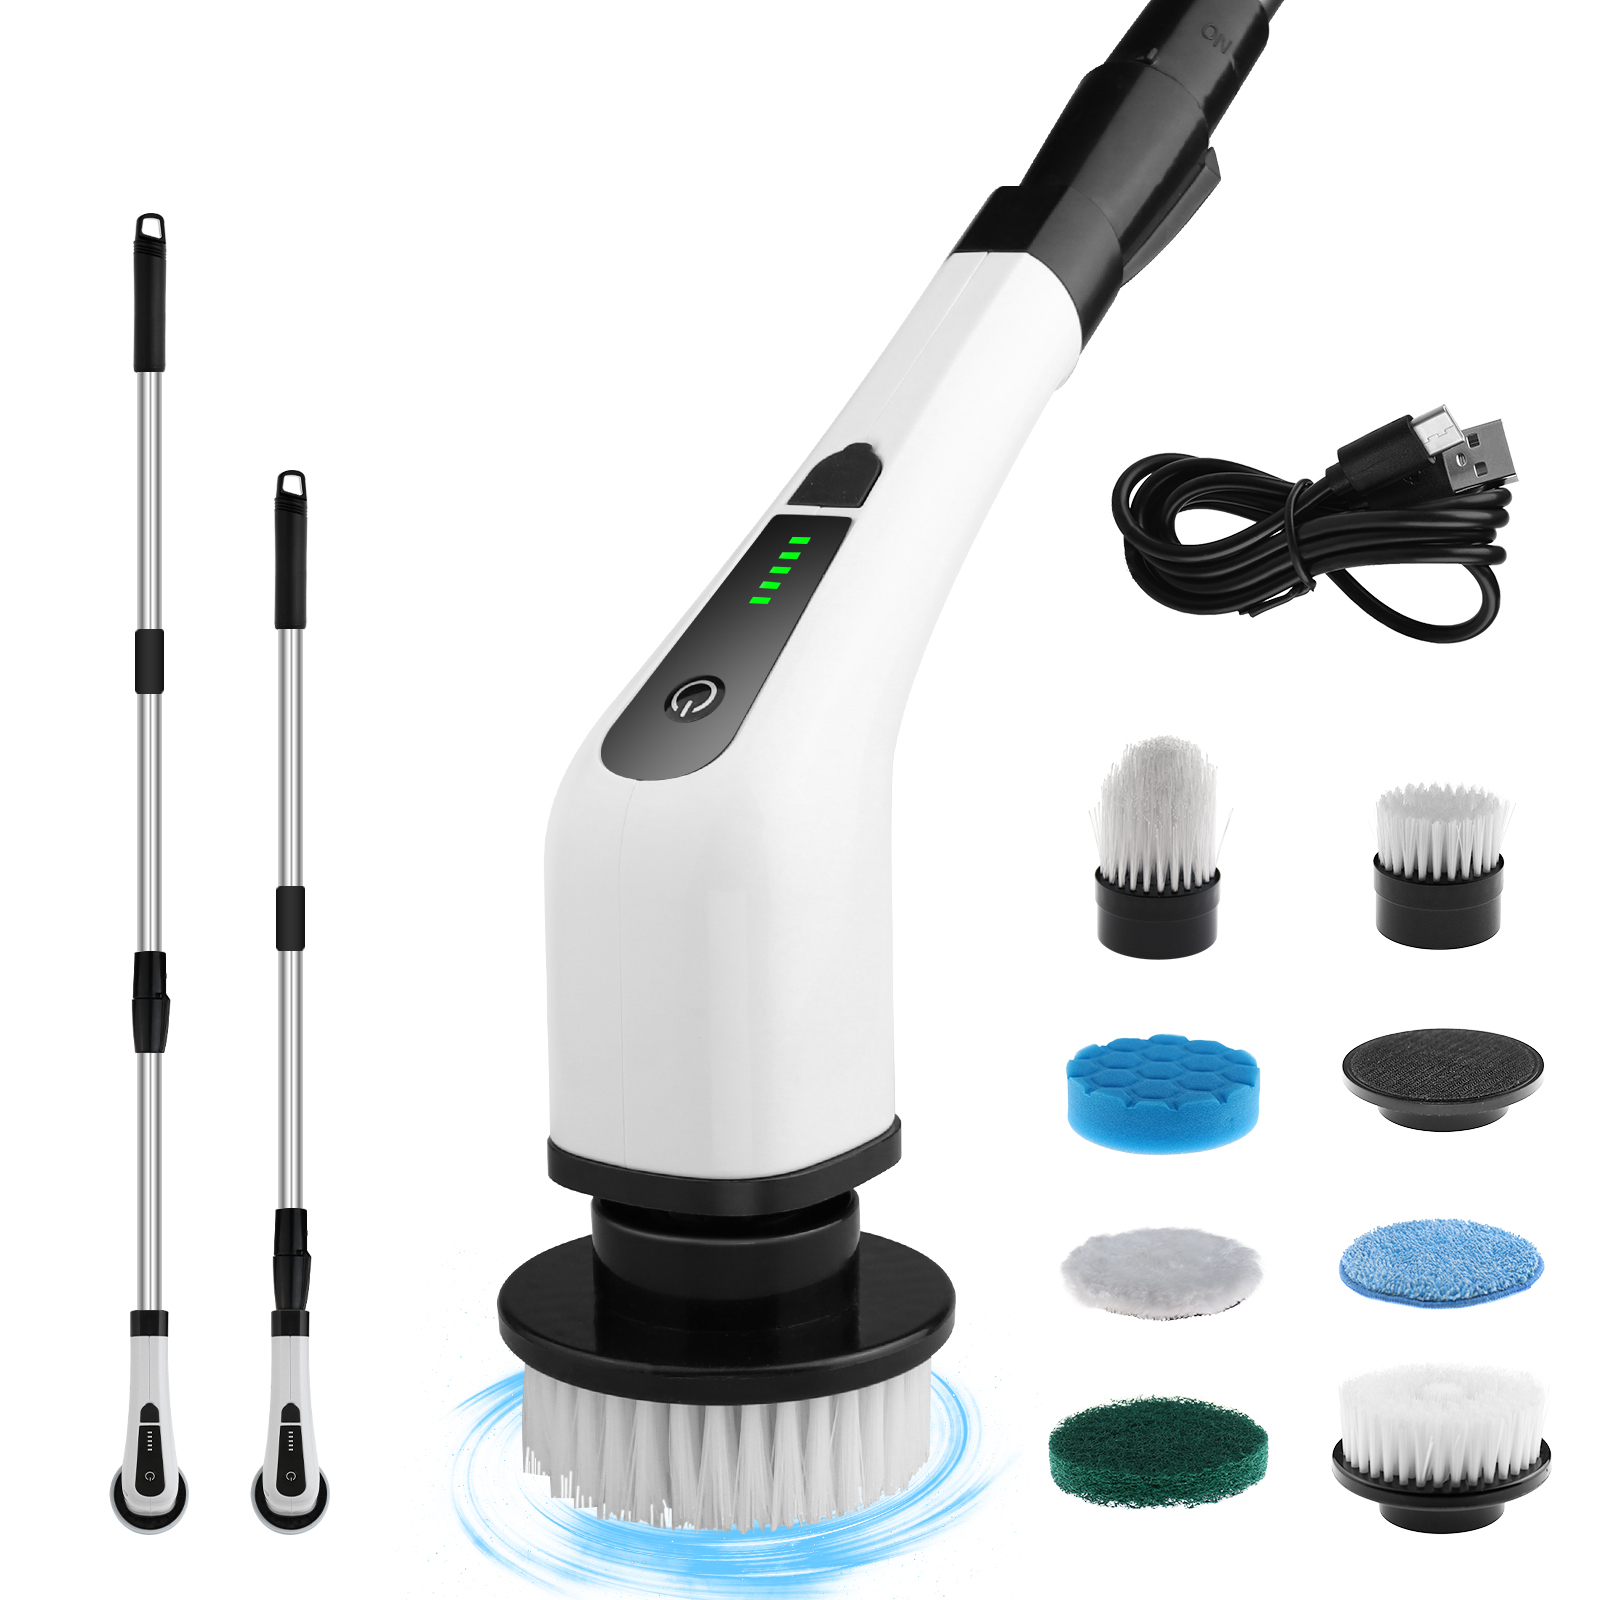 Synoshi Power Spin Scrubber - Rechargeable Electric Spin Scrubber